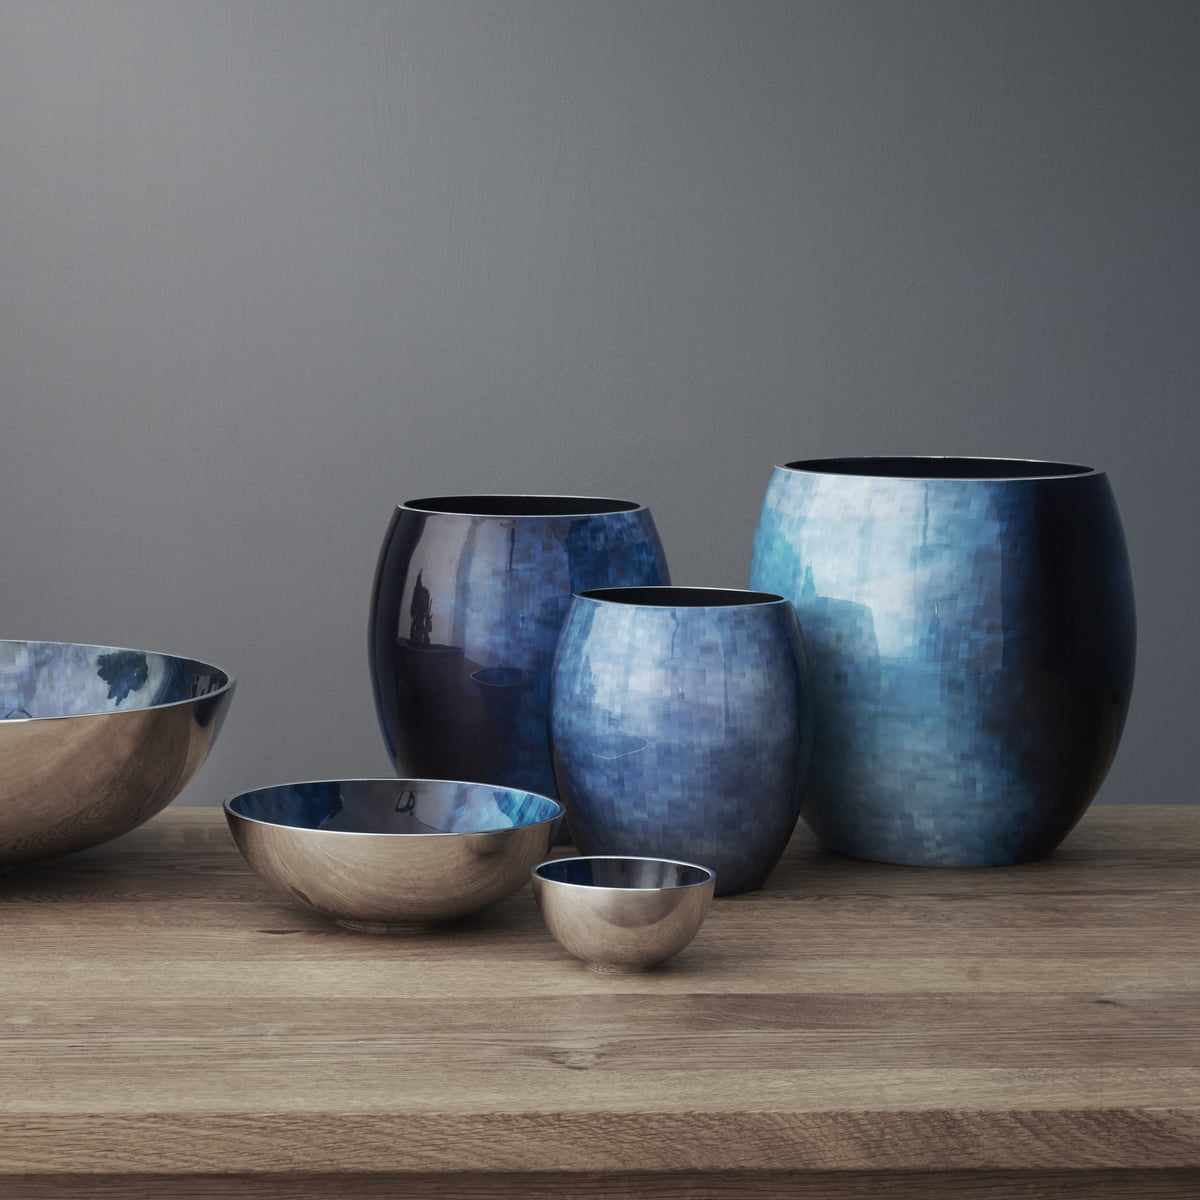 Stelton Stockholm Bowl our in shop by Horizon